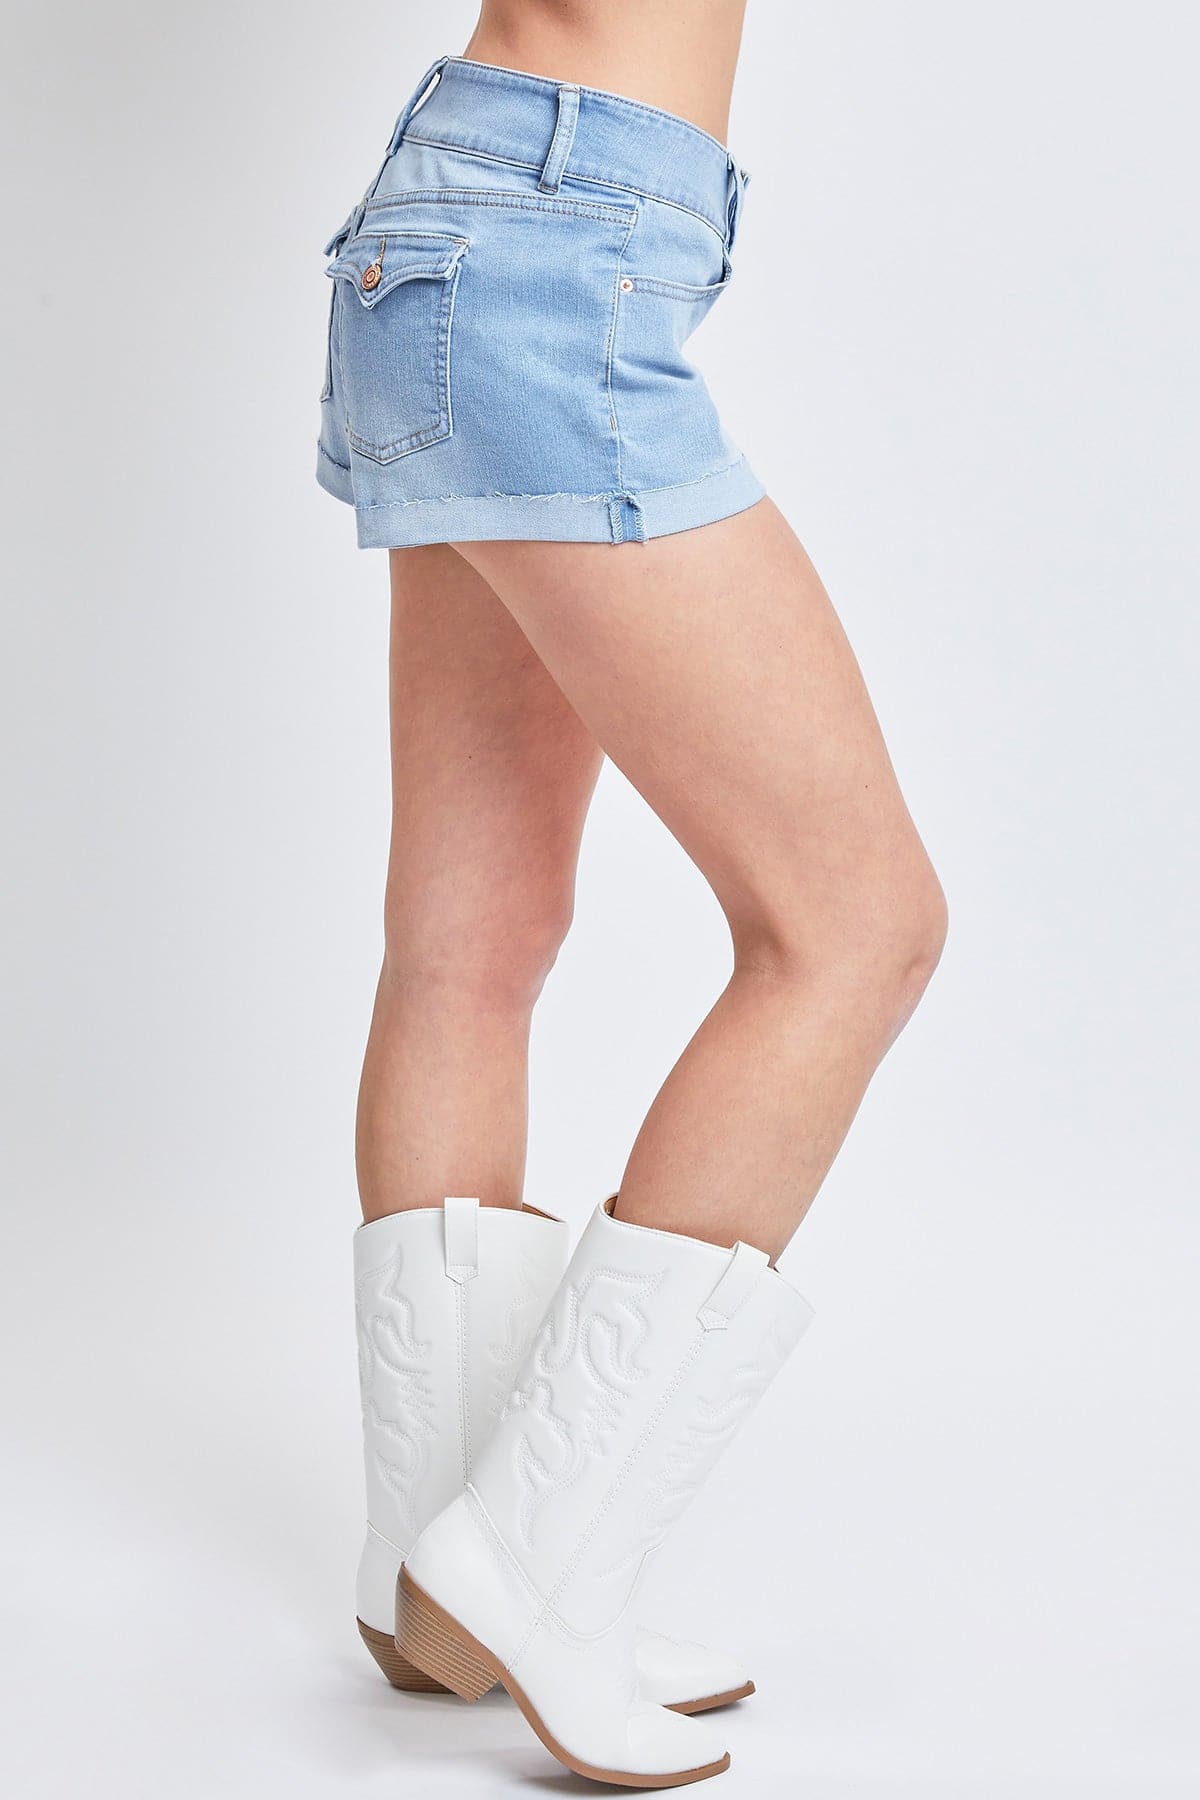 Women's  2-Button Denim Shorts with Flap Back Pockets and Cuffed Hems